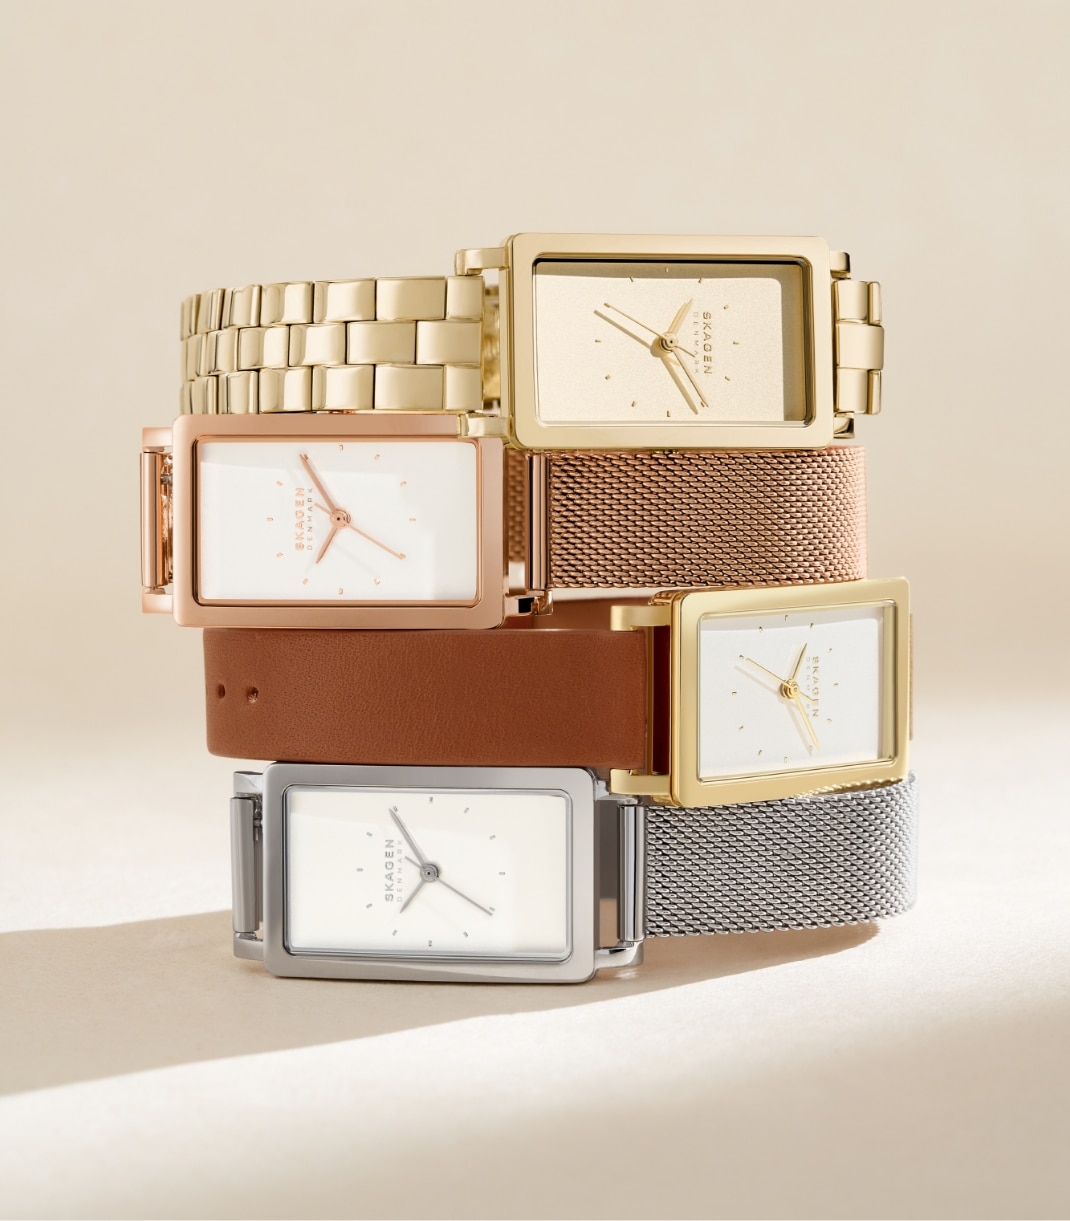 Multiple images showing the new collection of Hagen watches